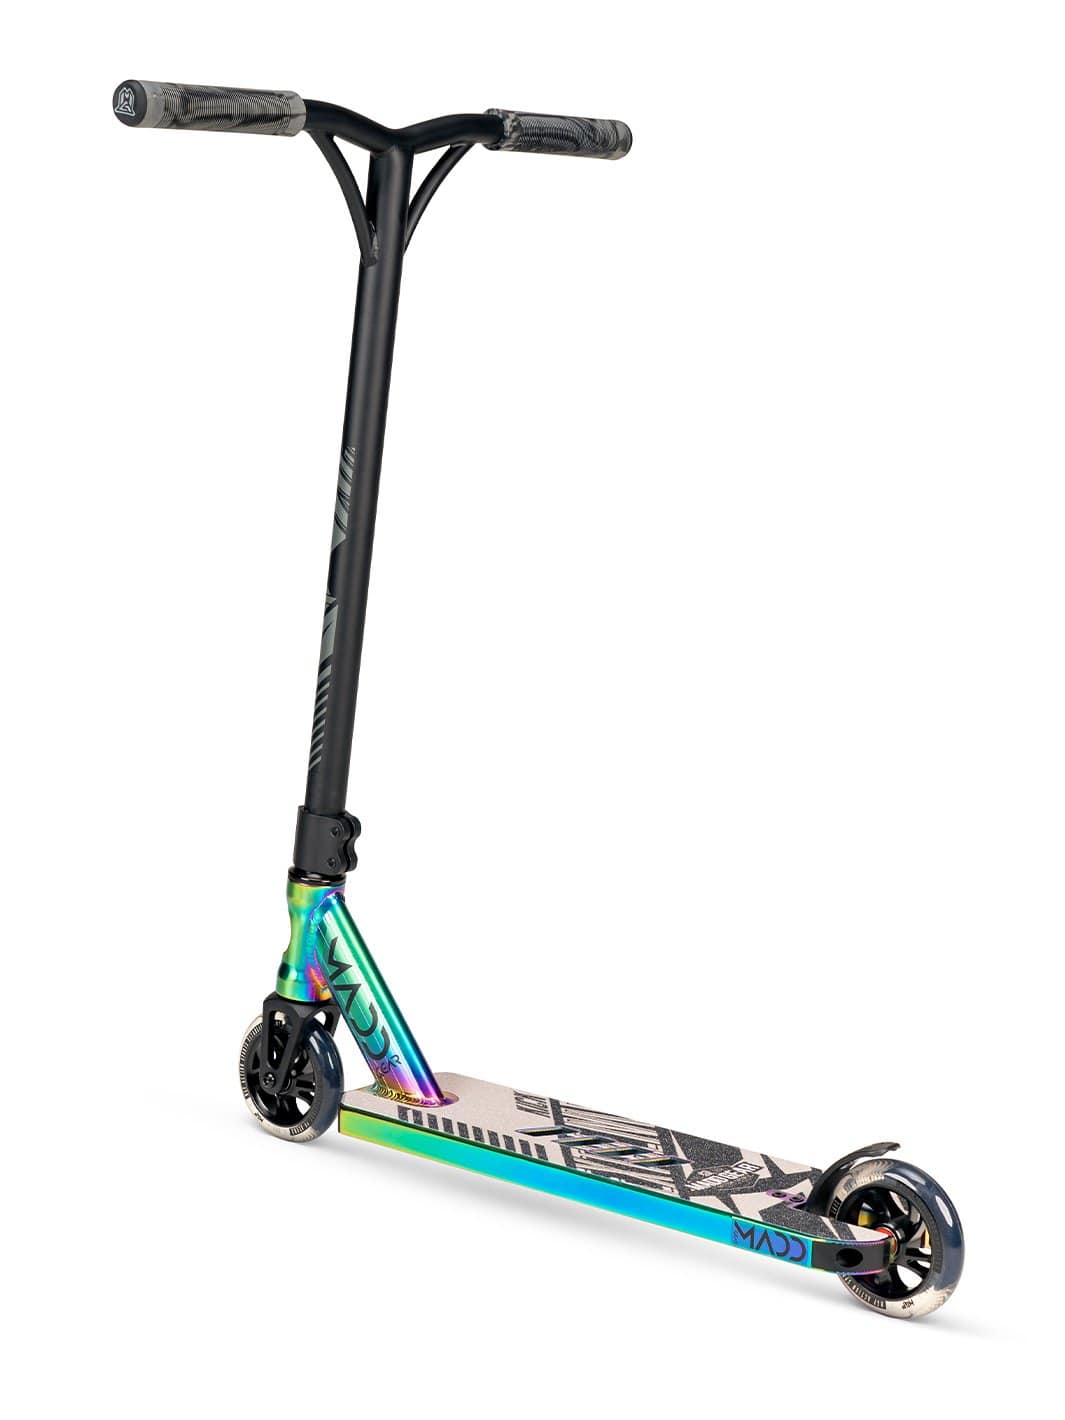 MADD GEAR KICK EXTREME SCOOTER NEO / BLACK